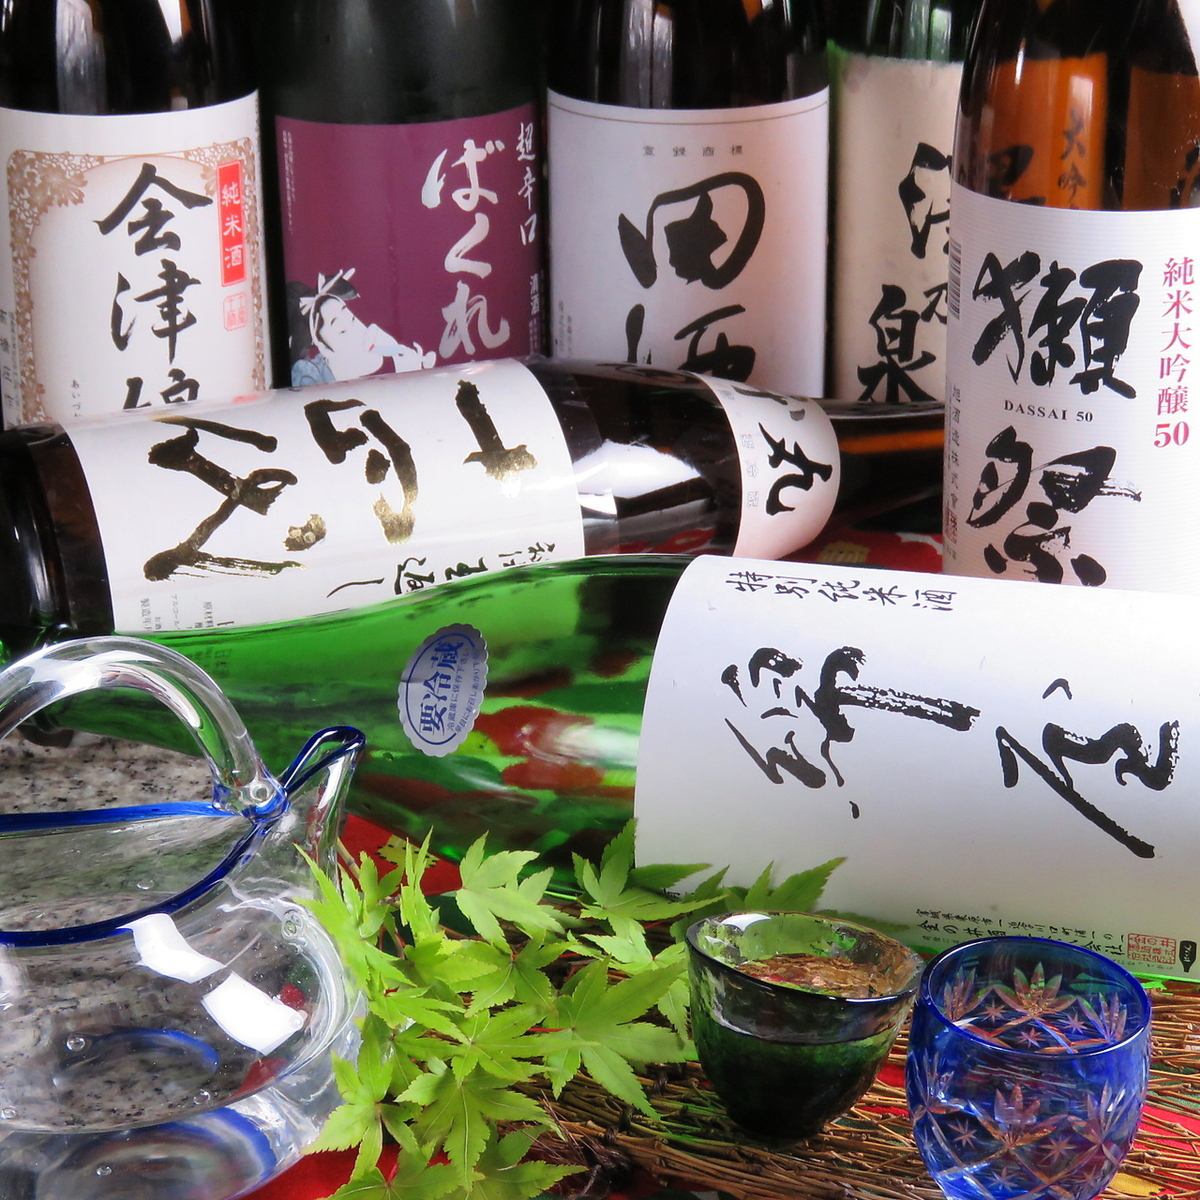 We have a wide selection of local sake and authentic shochu.To go with seasonal appetizers...